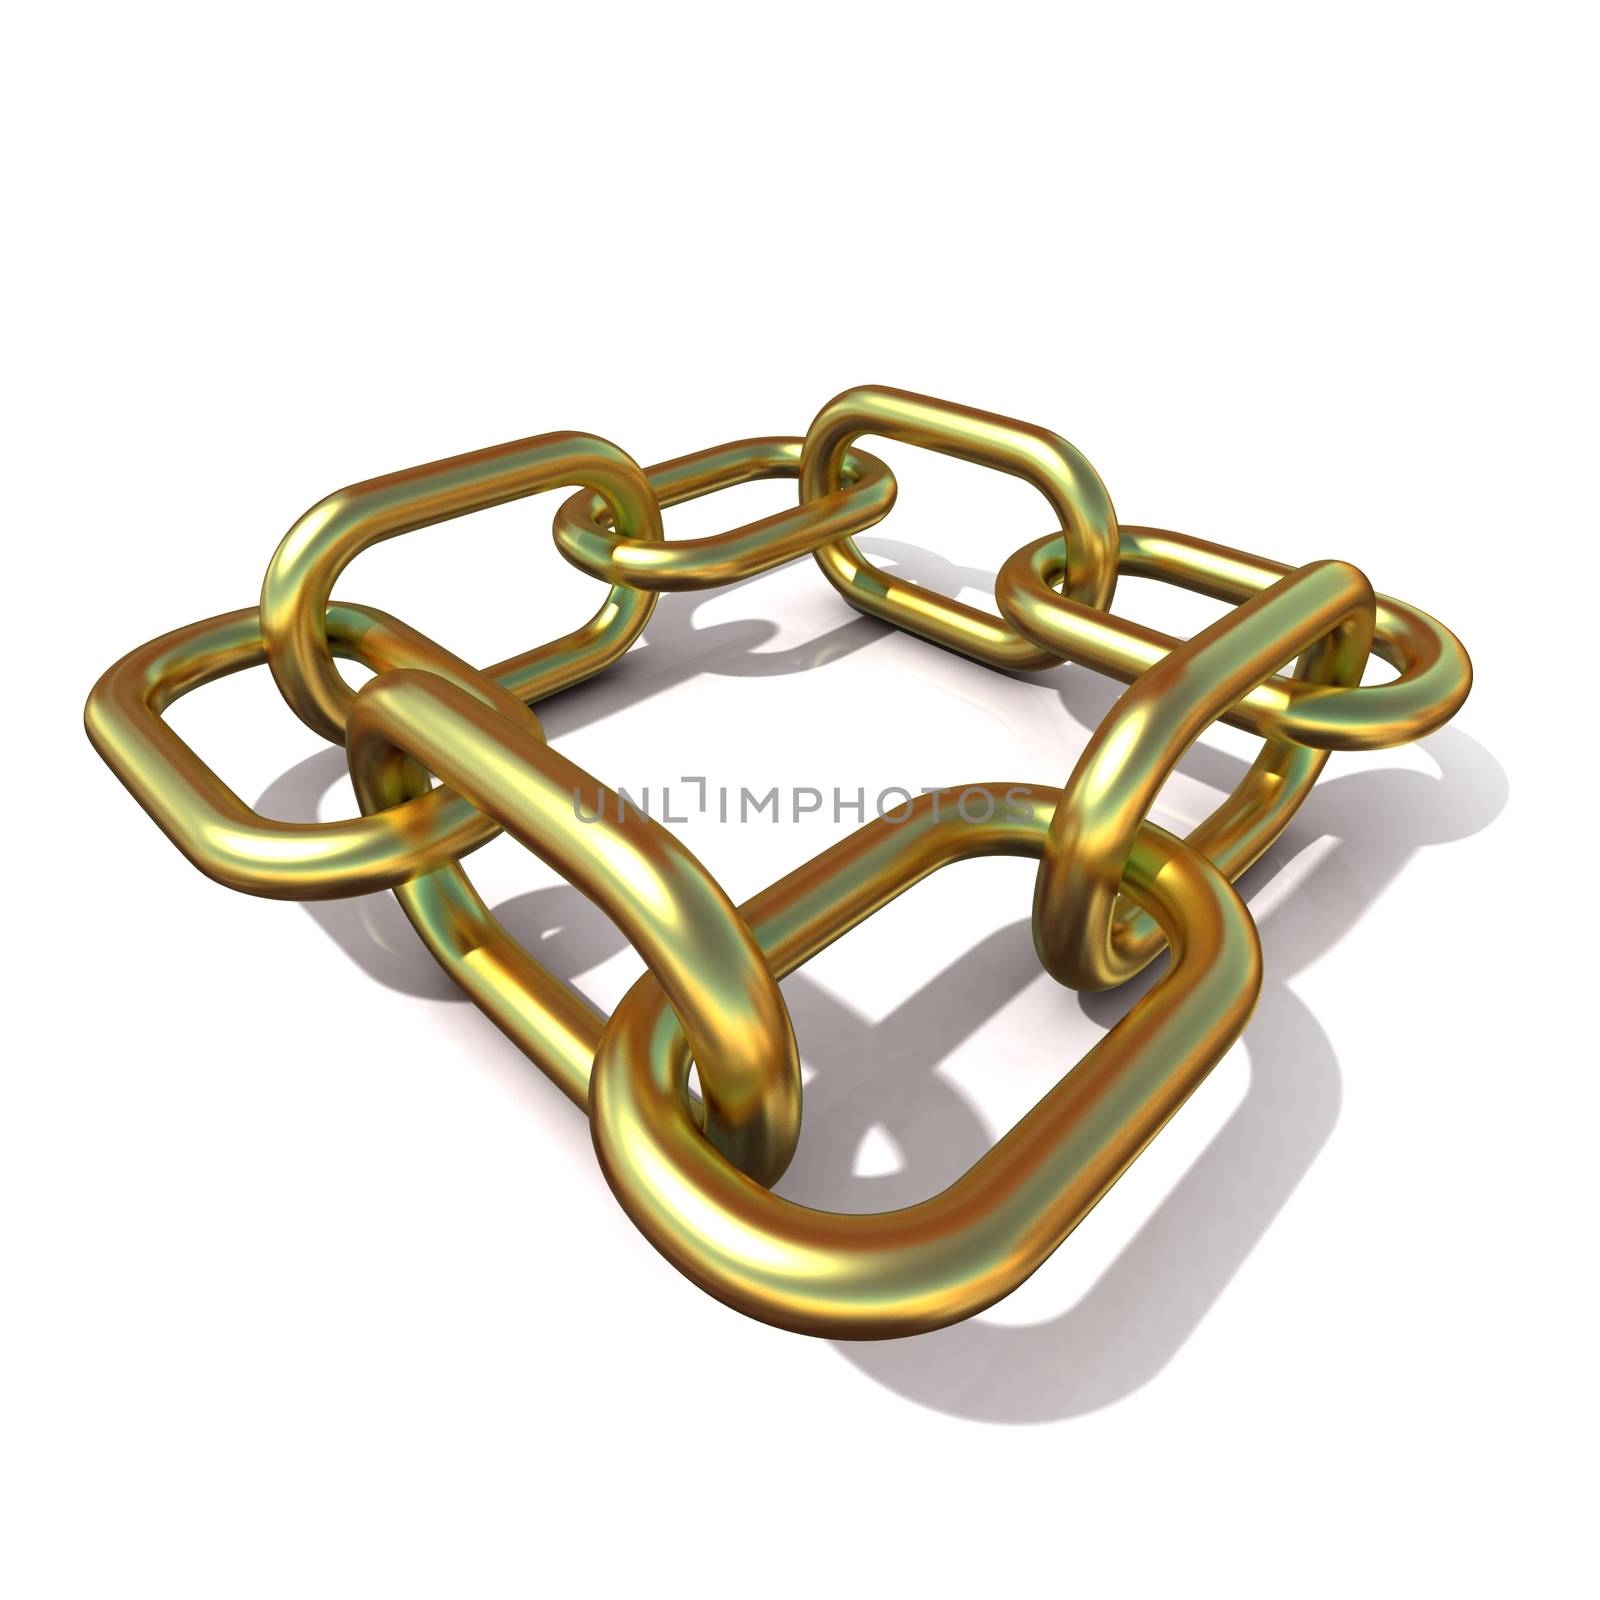 Abstract 3D illustration of a brass chain link by djmilic